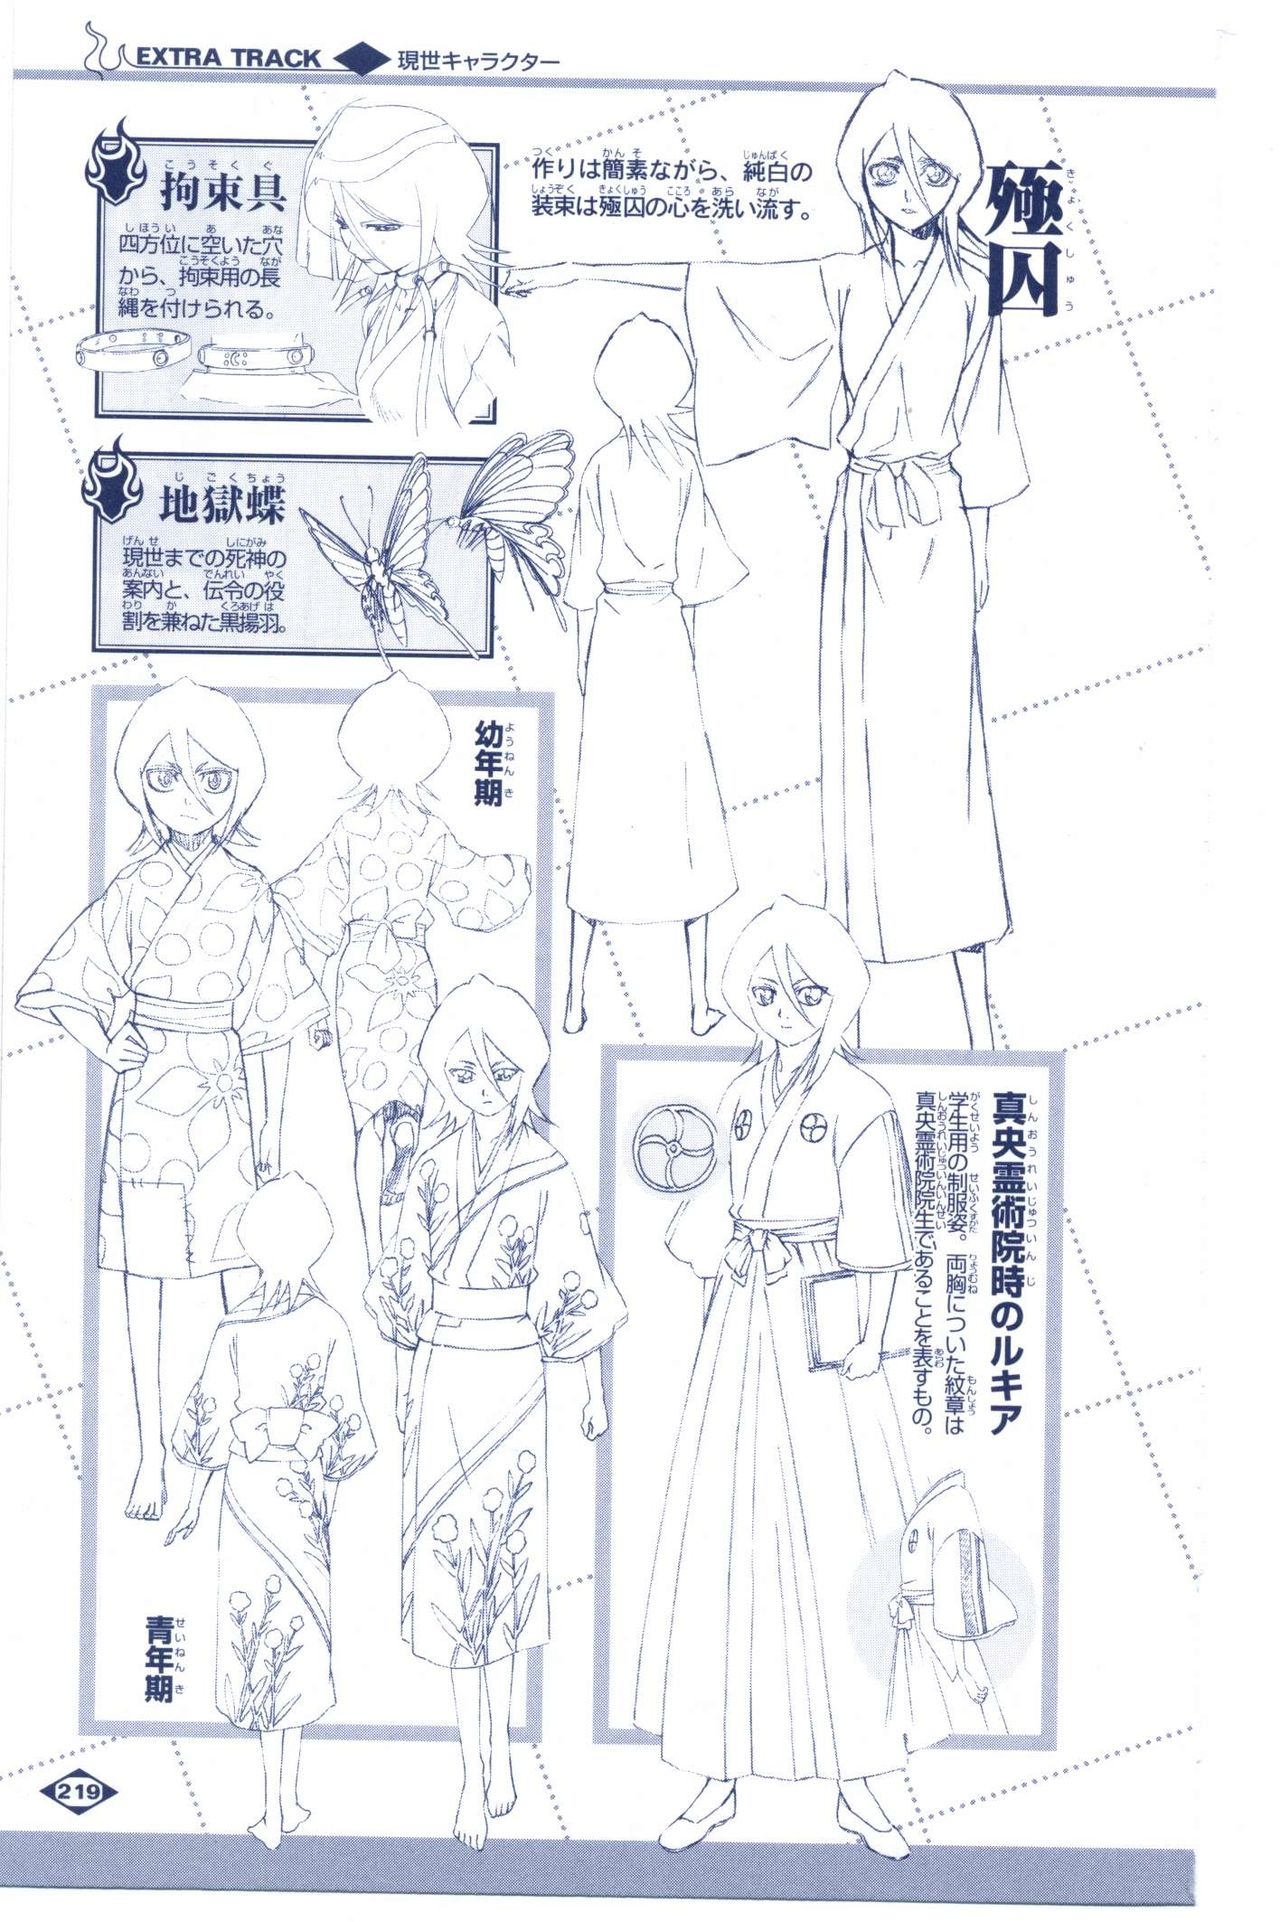 Bleach: Official Animation Book VIBEs 219